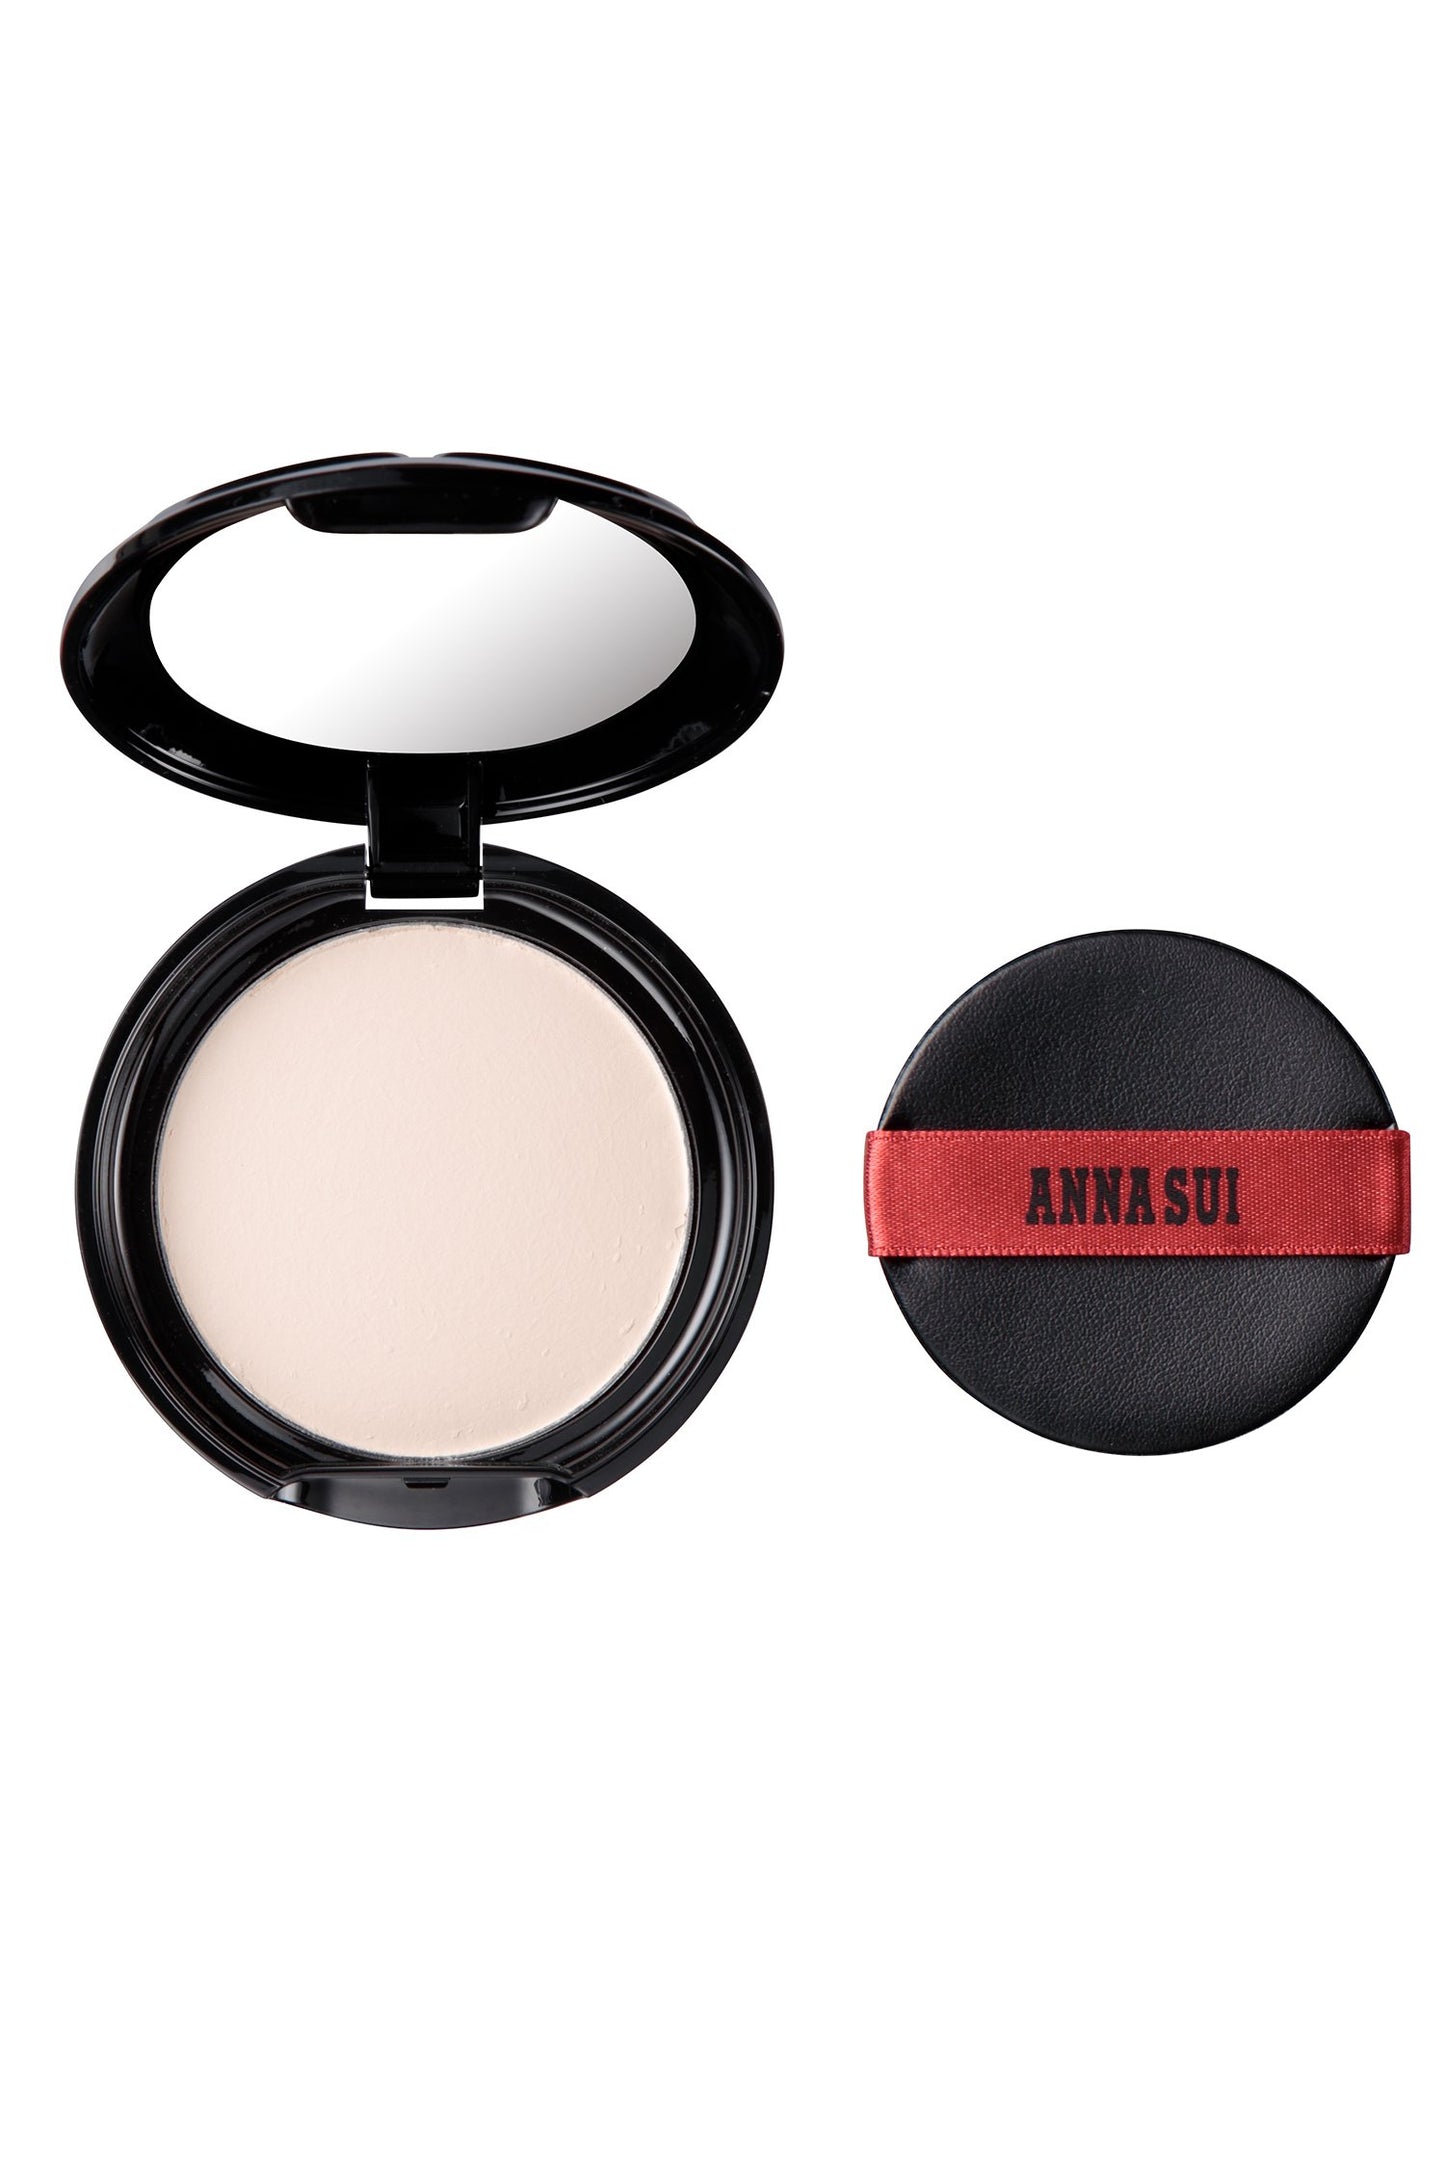 Open powder case, rounded black, powder mirror, black pad with red ribbon, black Anna Sui label